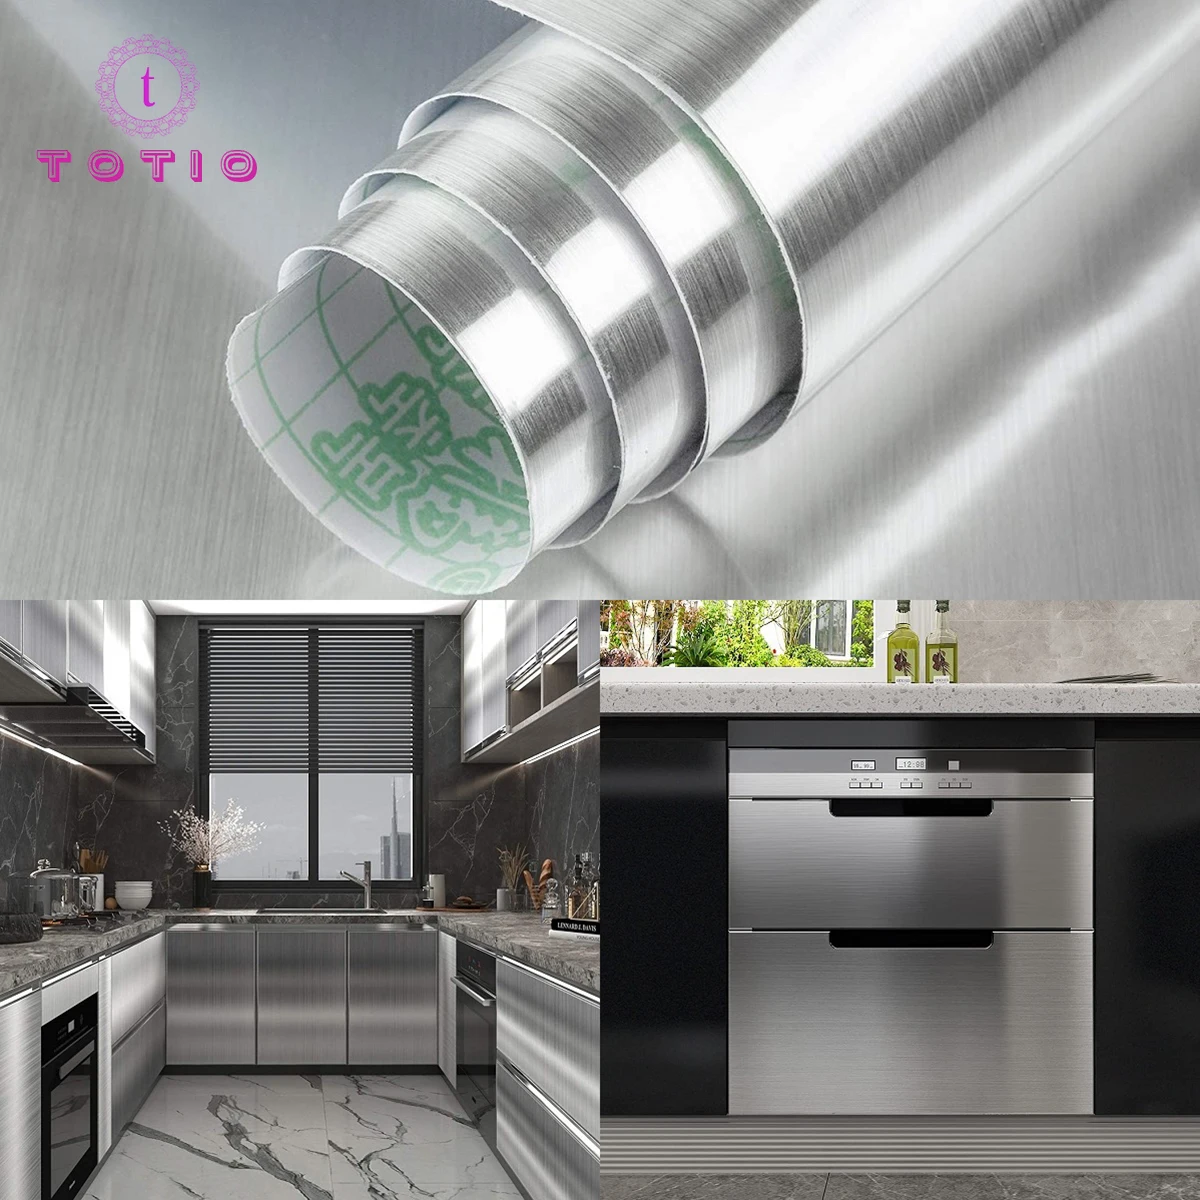 TOTIO Waterproof Silver Wallpaper Self Adhesive Stainless Steel Wallpaper Heat Resistance Vinyl Oilproof House Appliance Kitchen 1pc stainless steel kitchen sink faucet washbasin trumpet mouth universal rotating hot cold household vegetable basin faucet